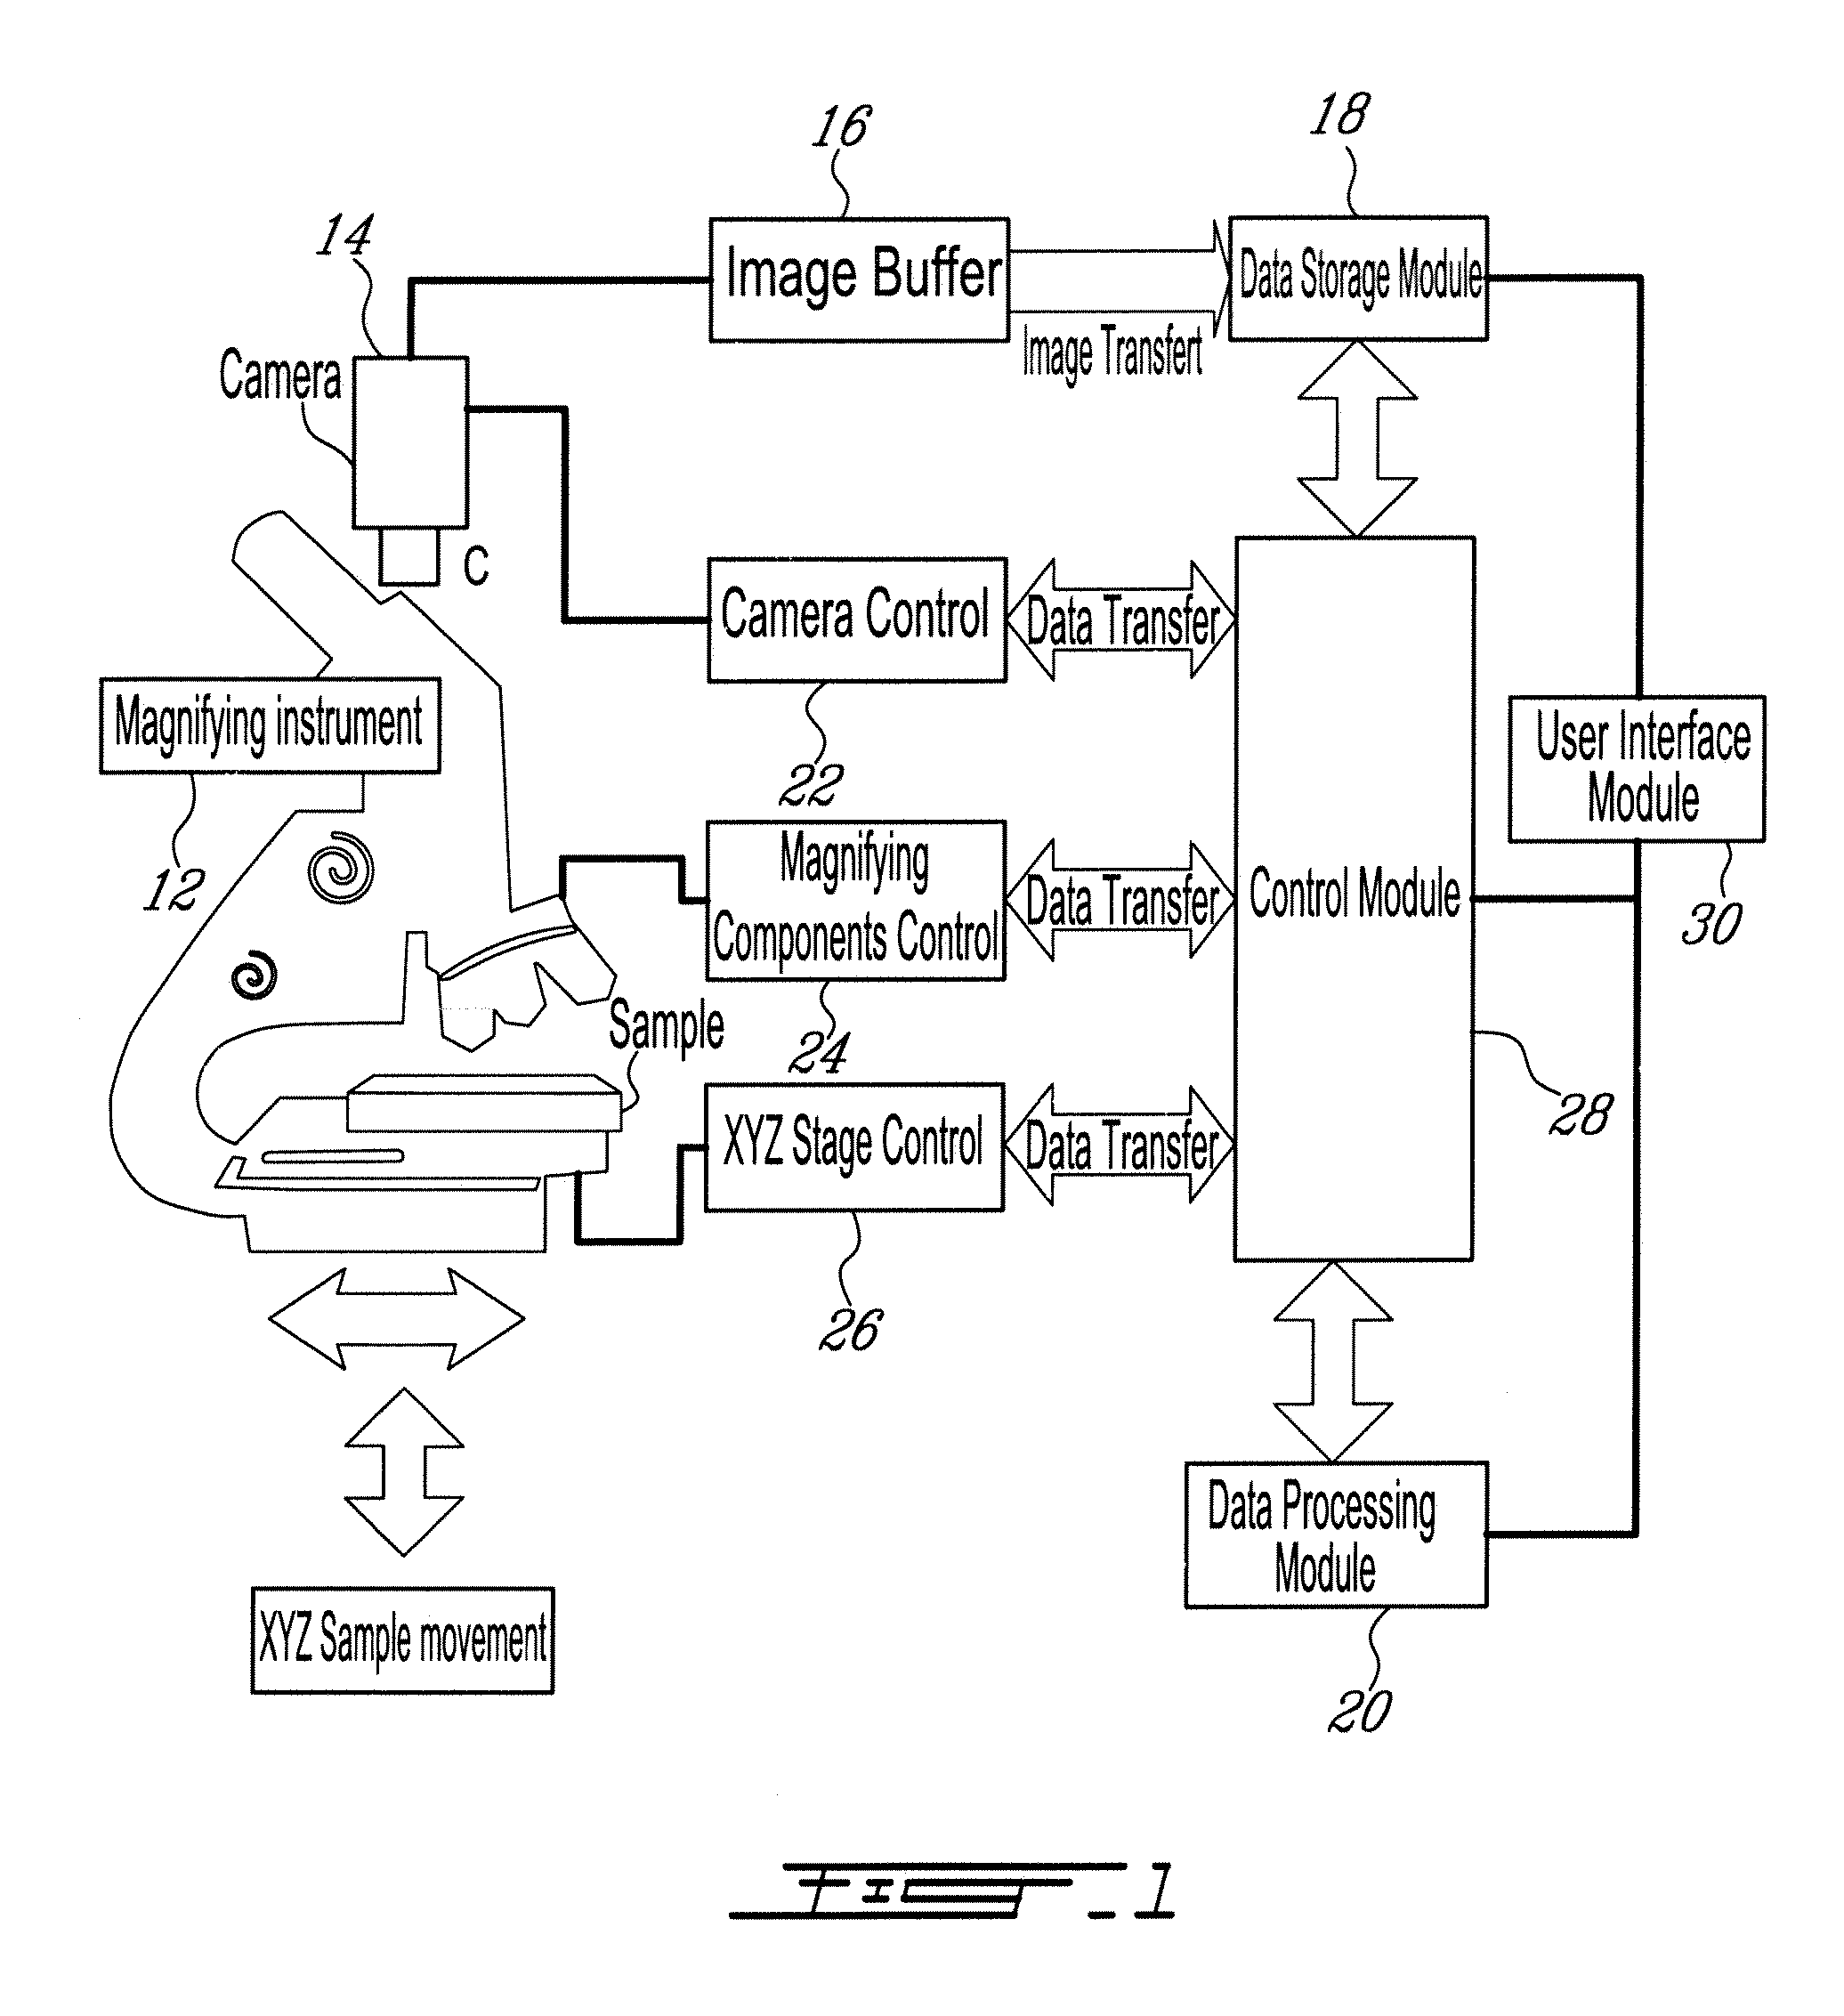 System and method for automatic measurements and calibration of computerized magnifying instruments